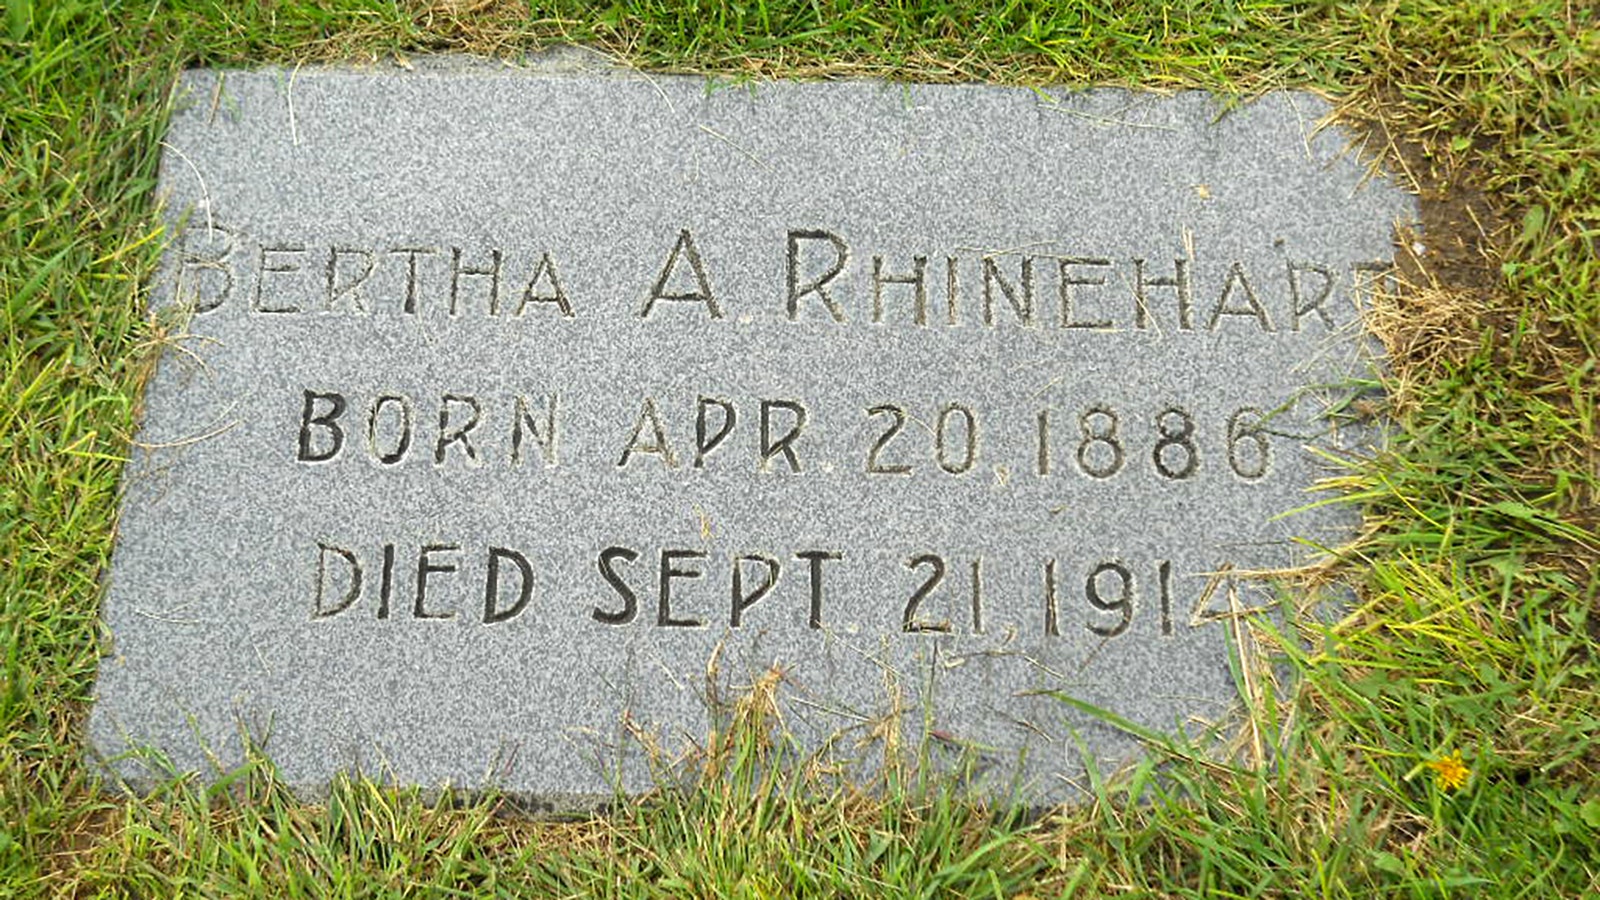 The grave of Bertha Rhinehart in Cheyenne’s Mount Olivet Cemetery. Note the date of death on the stone is wrong, as she died Sept. 20, 1914.